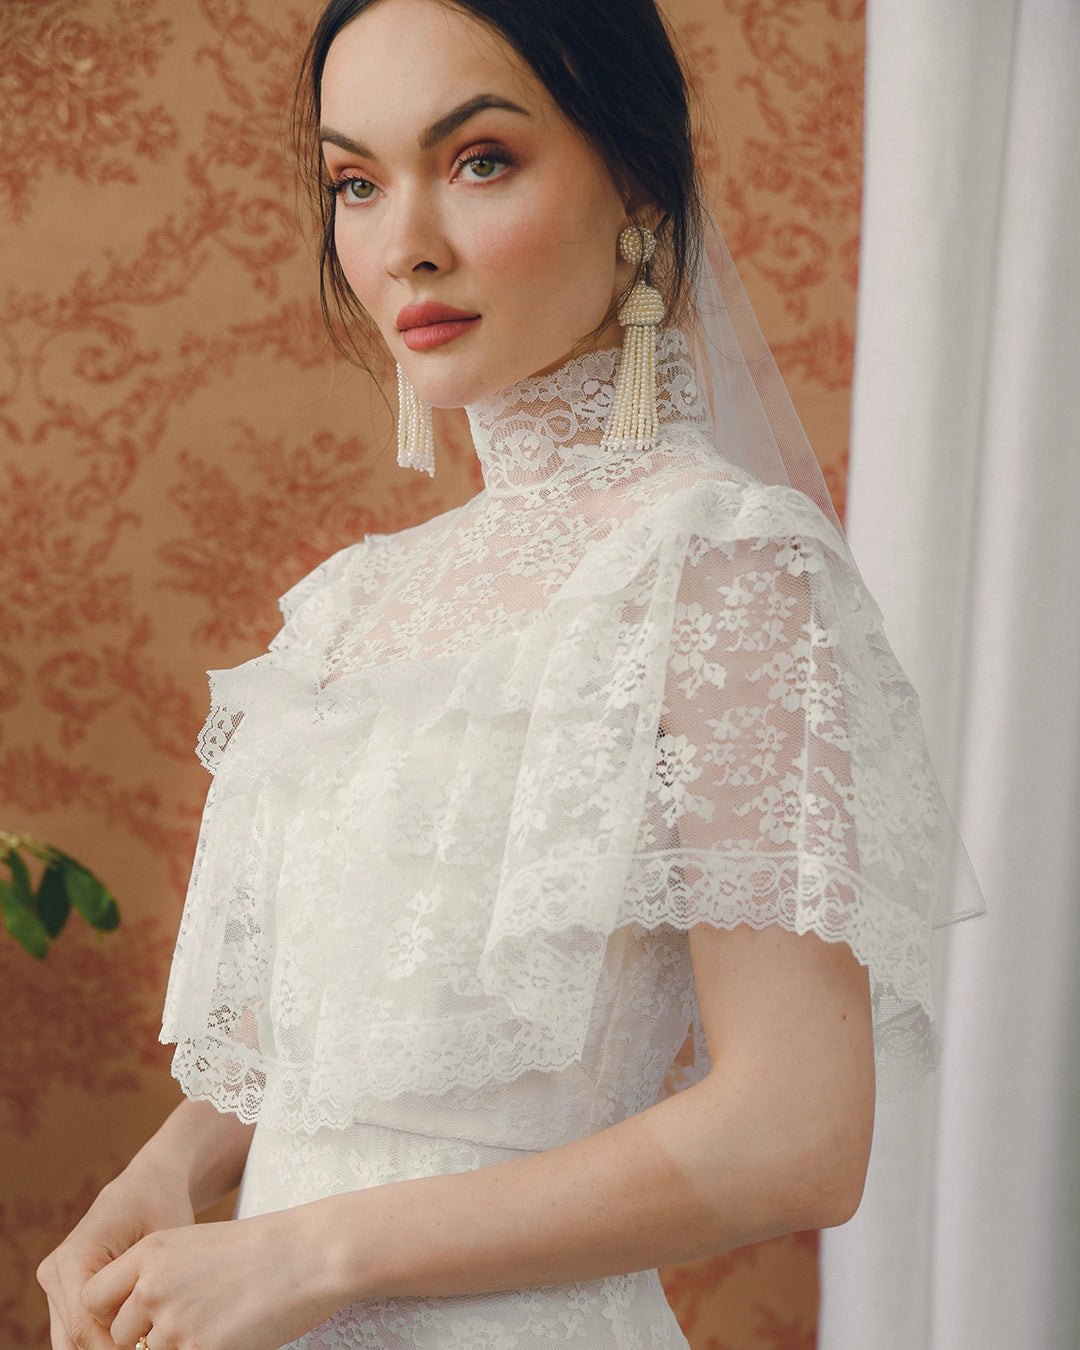 Vintage Ivory Lace High-Neck Dress With Cape Collar